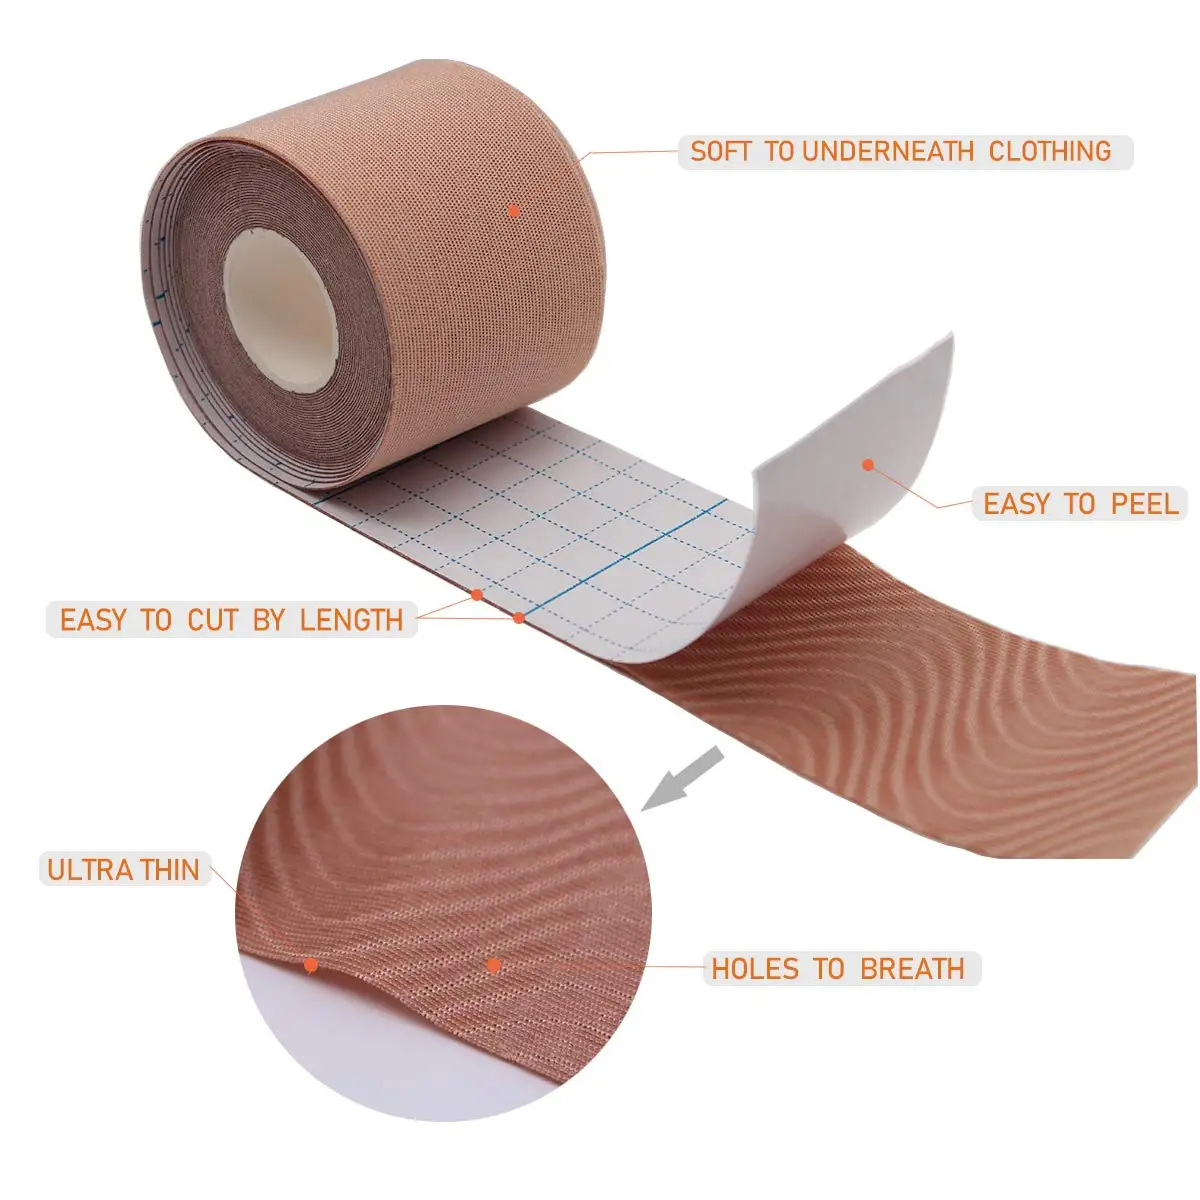 body tape for breast